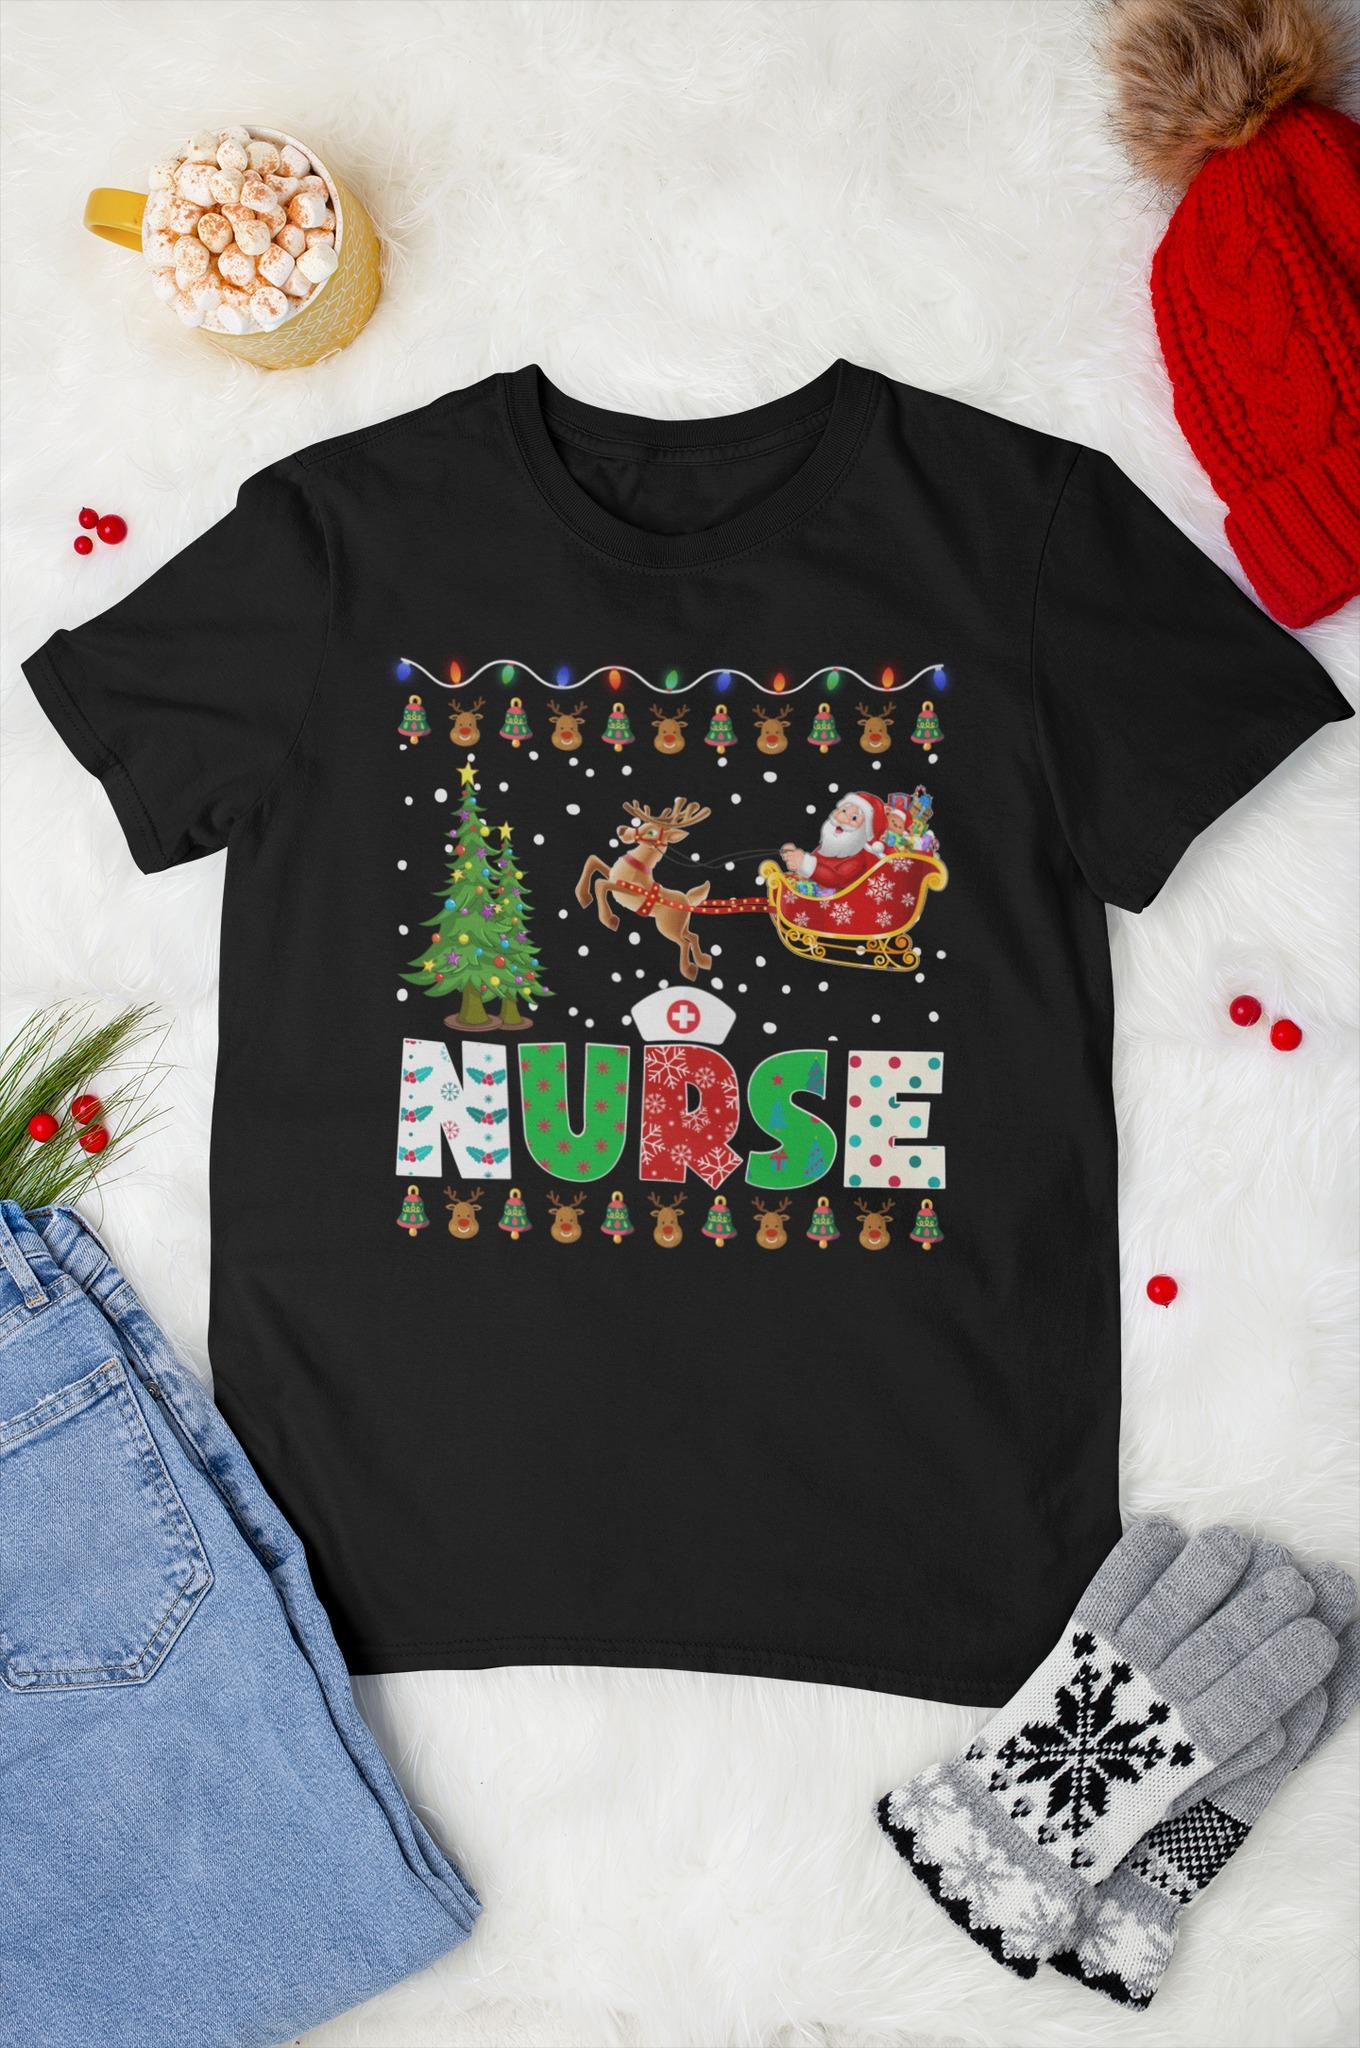 Santa Claus's sleign - Christmas gift for nurse, Christmas day ugly sweater